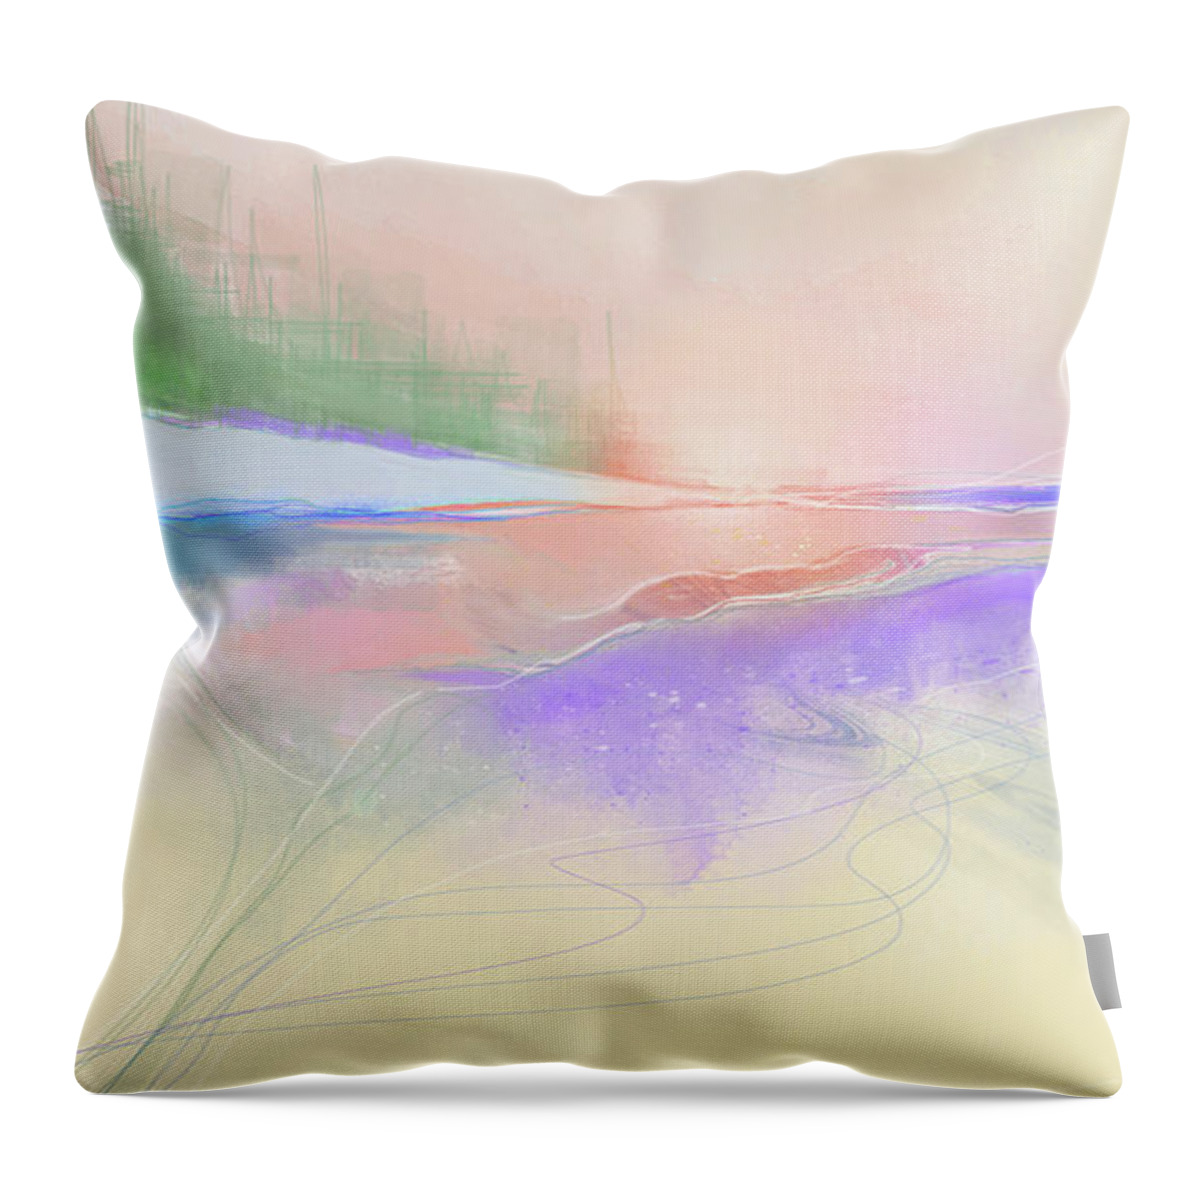 Abstract Throw Pillow featuring the digital art Unconventional by Gina Harrison